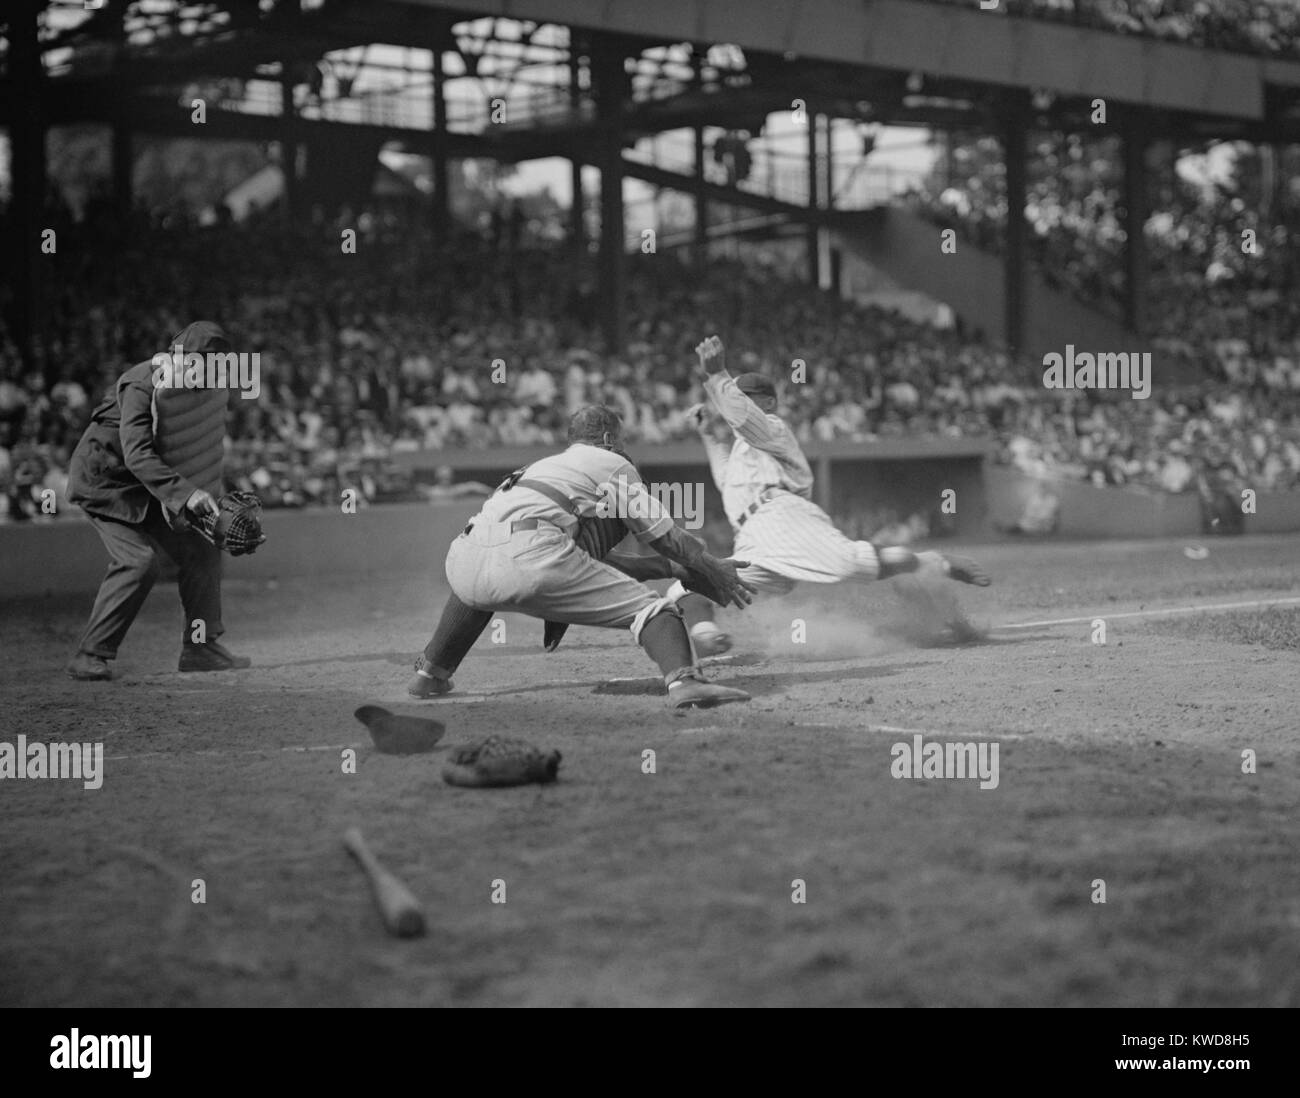 Washington Senators' Goose Goslin slides safely into home, August 15, 1925. New York Yankees' catcher Wally Schan reaches for the baseball which came too late for the out. August 15, 1925. (BSLOC 2015 17 8) Stock Photo